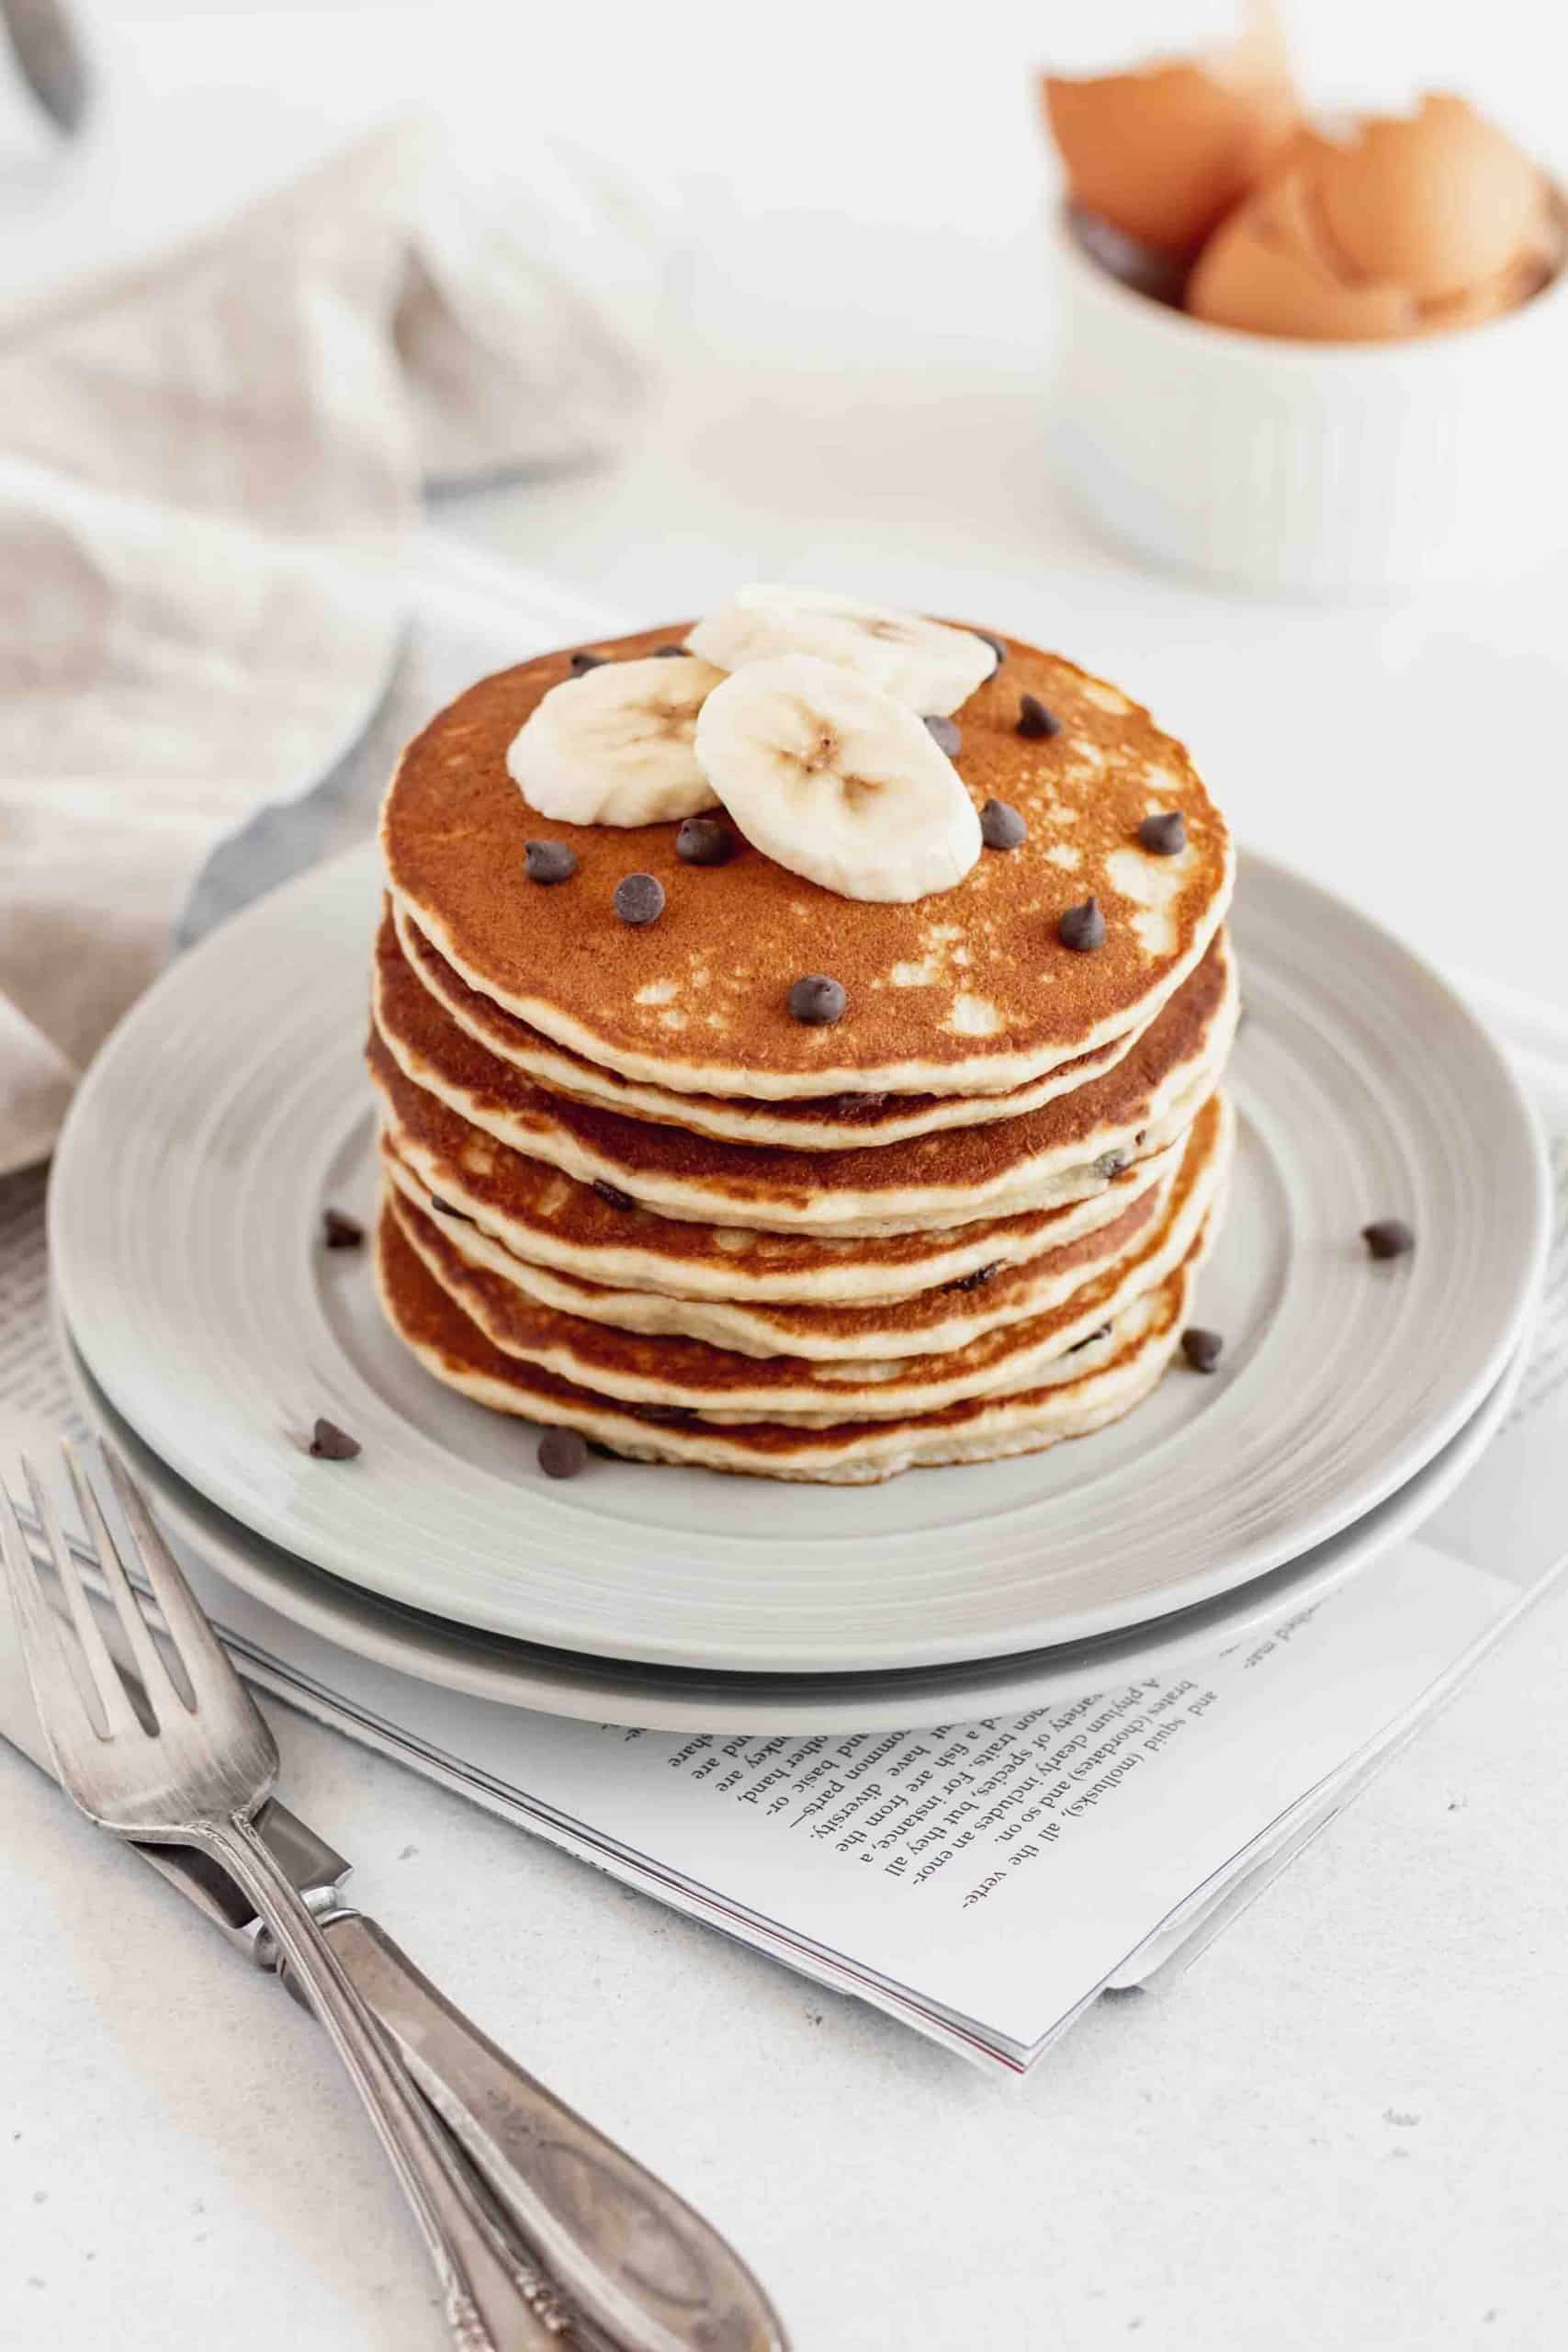 A stack of banana pancakes with chocolate chips